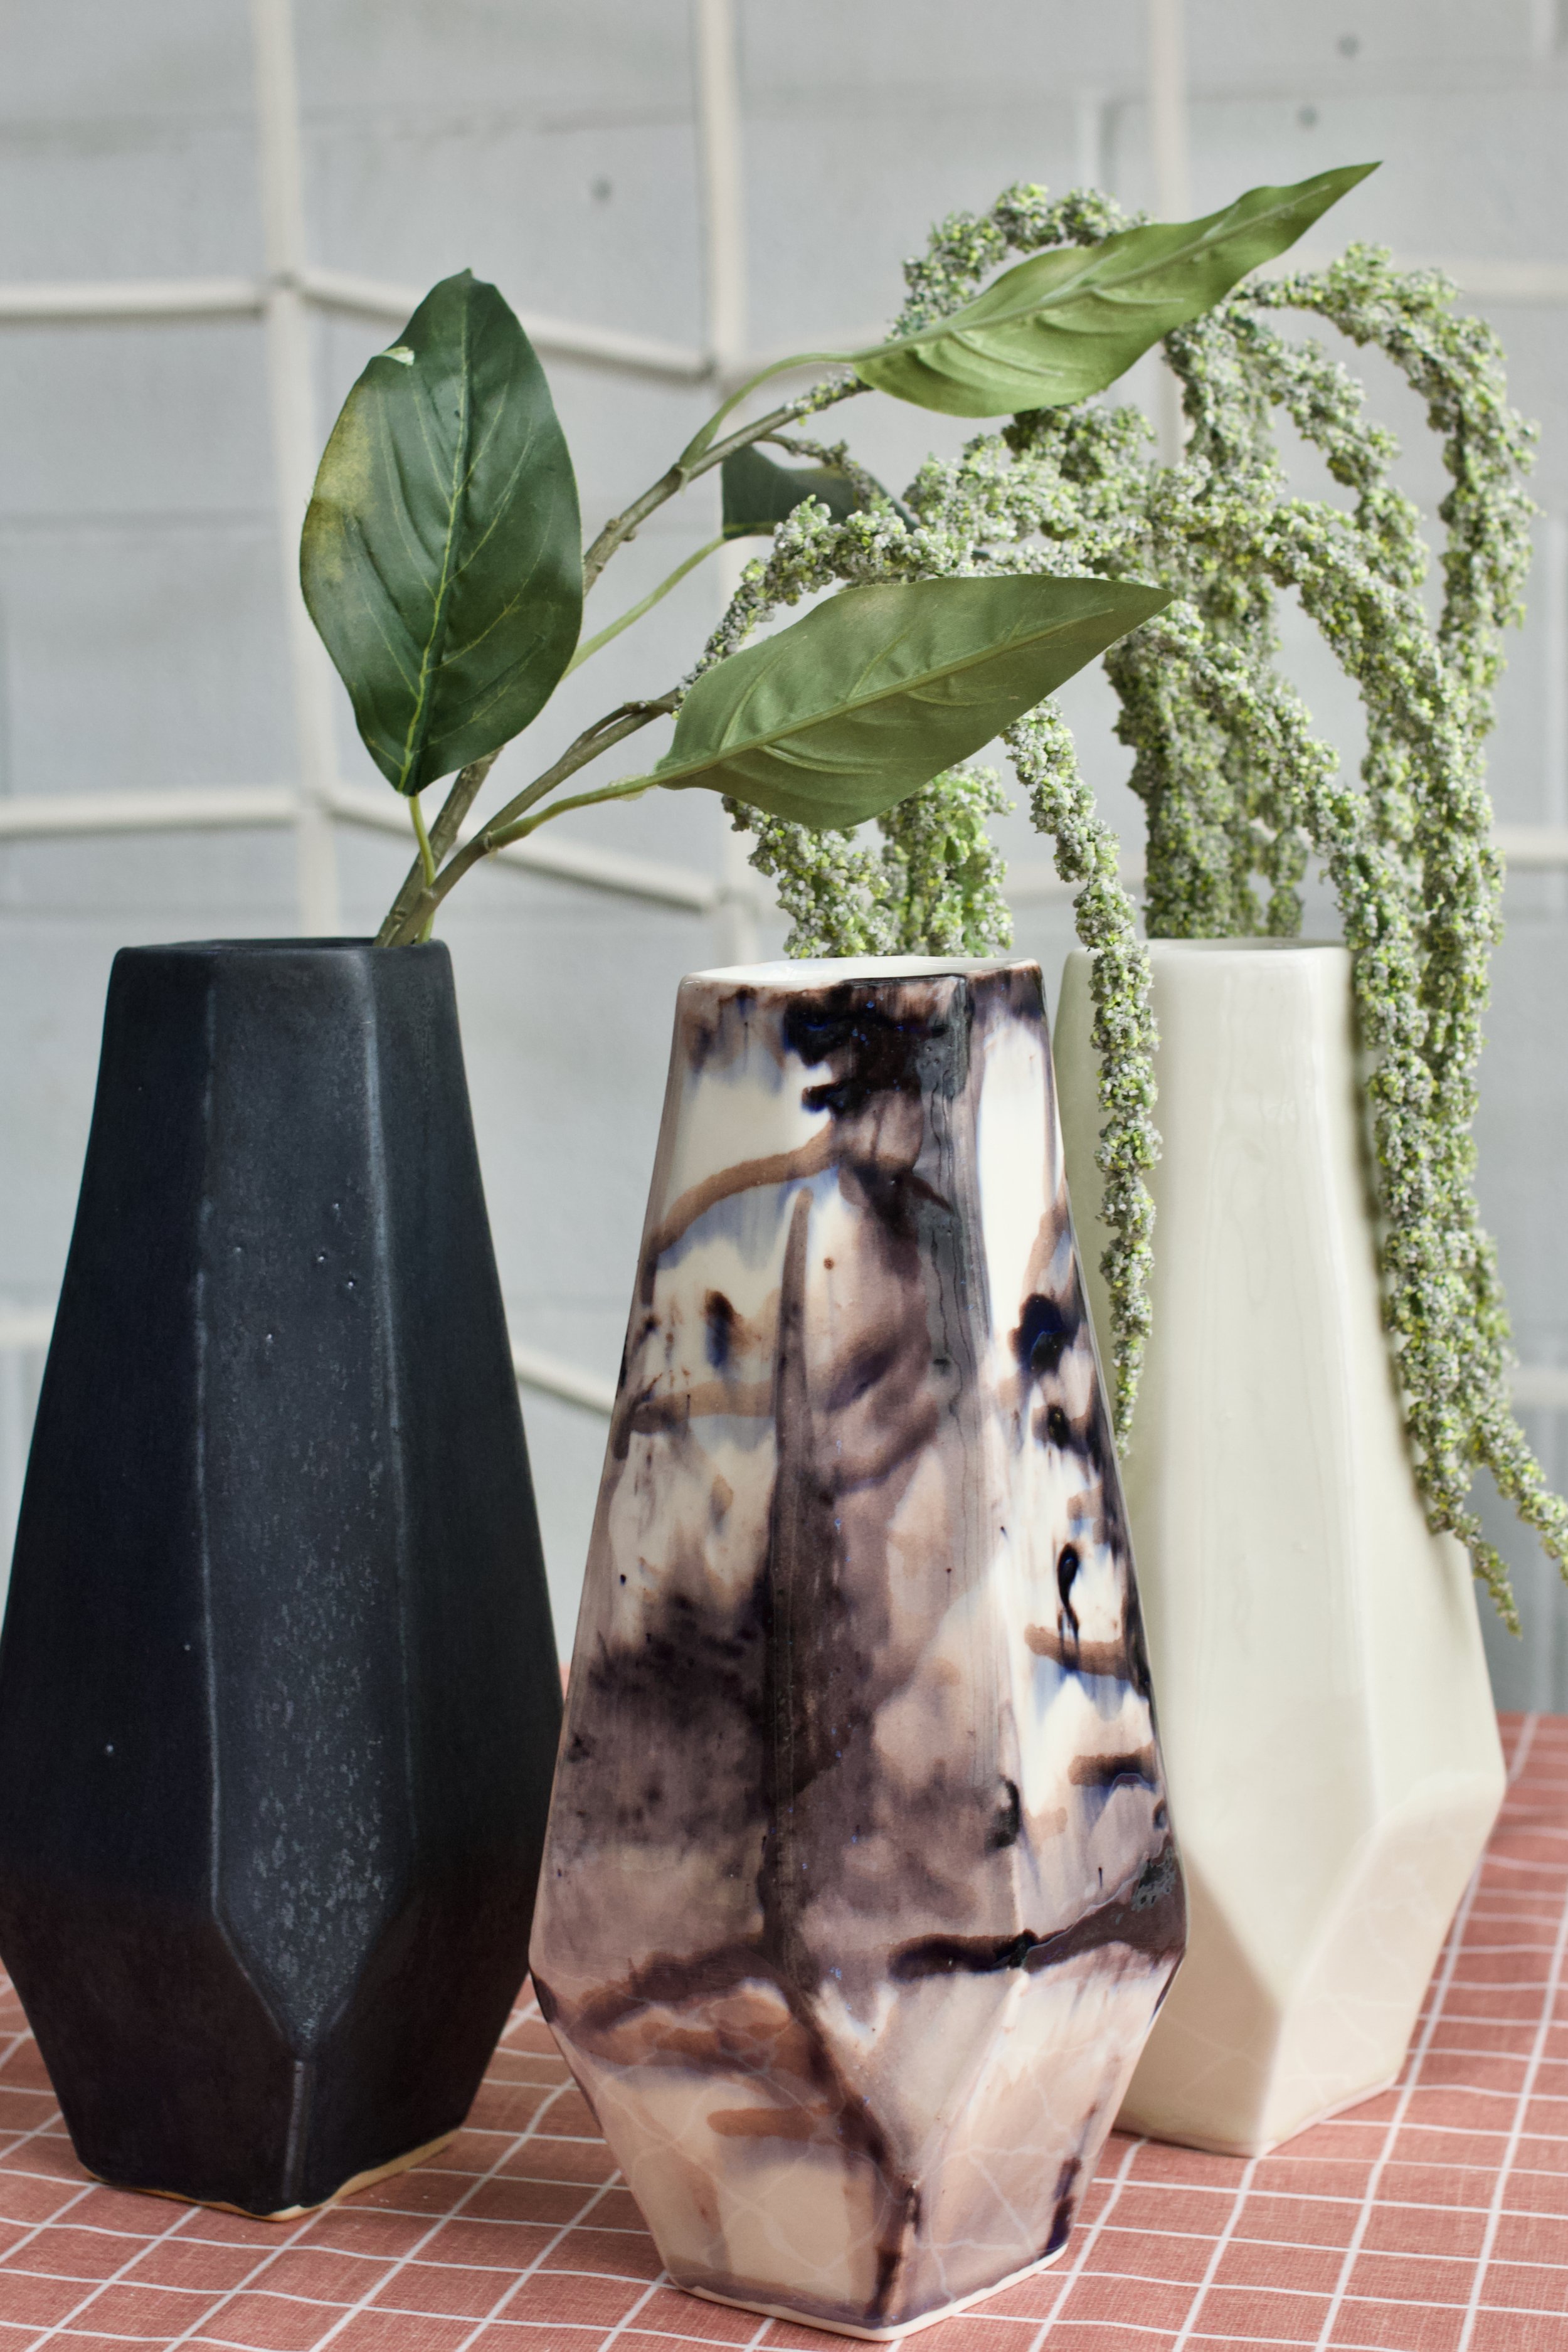  Lauren HB Studio’s Core Collection of three different vases with greenery in them 